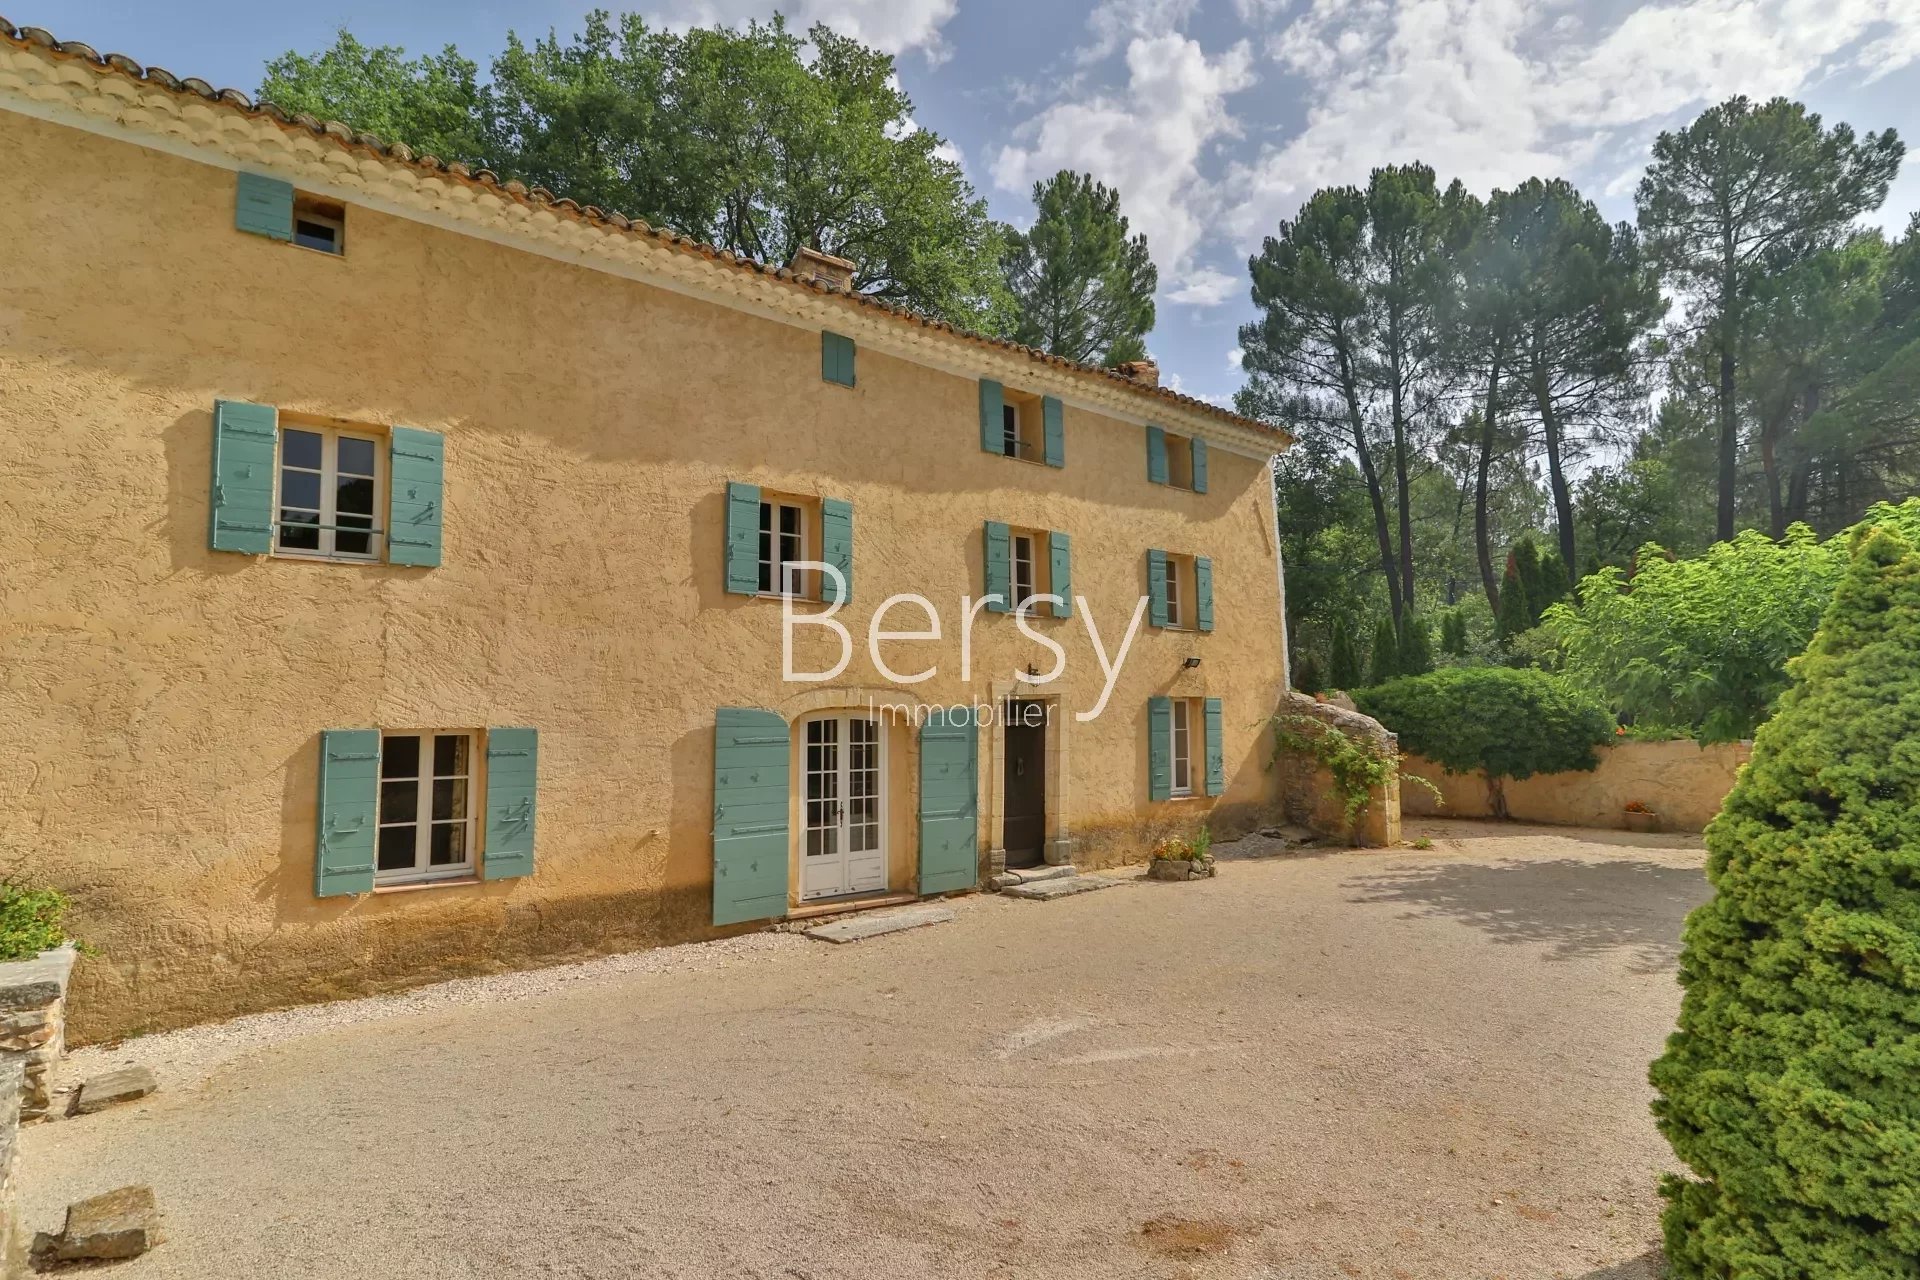 ★Magnificent Bastide on a Park of 2 Hectares★ Surrounded by Vineyards and Landscaped Gardens with Swimming Pool★ Garage and Independent Apartment★